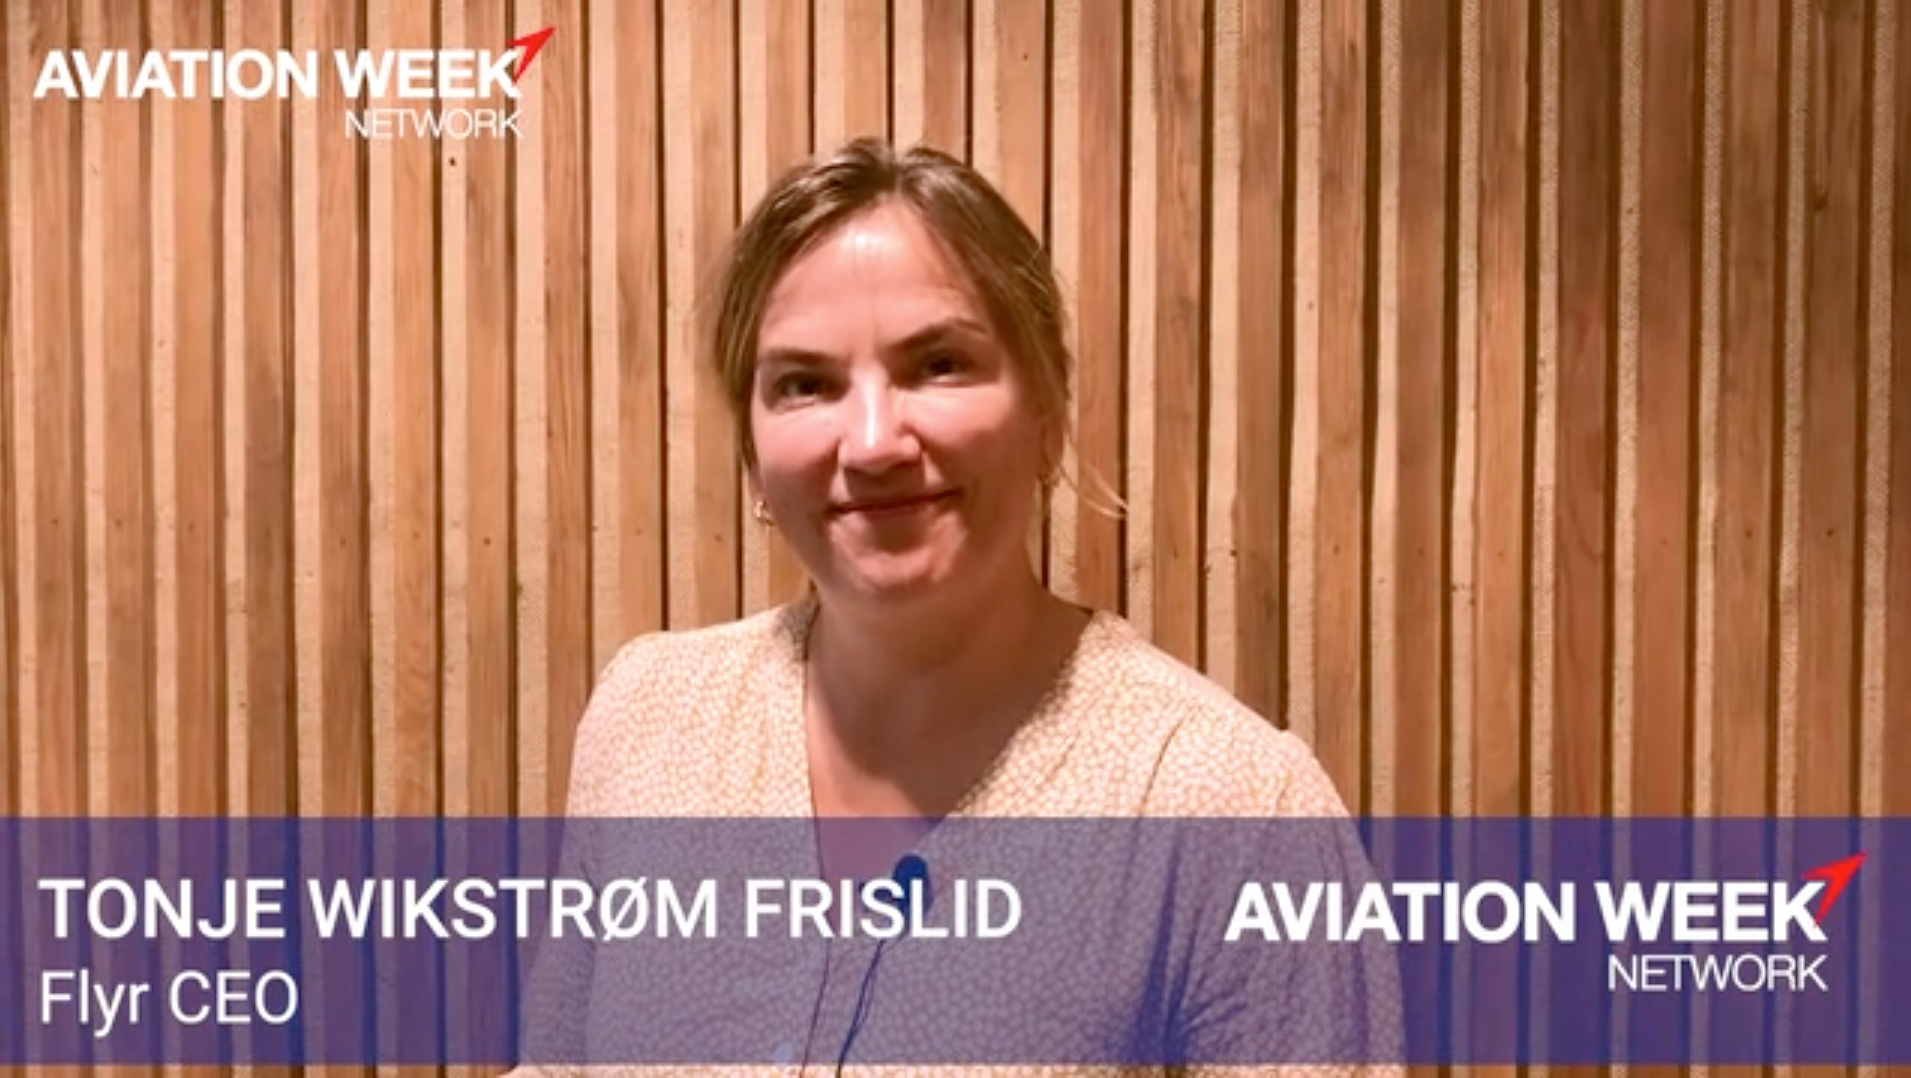 Video: Norwegian Startup Flyr Uses Flexibility To Weather Challenging Start